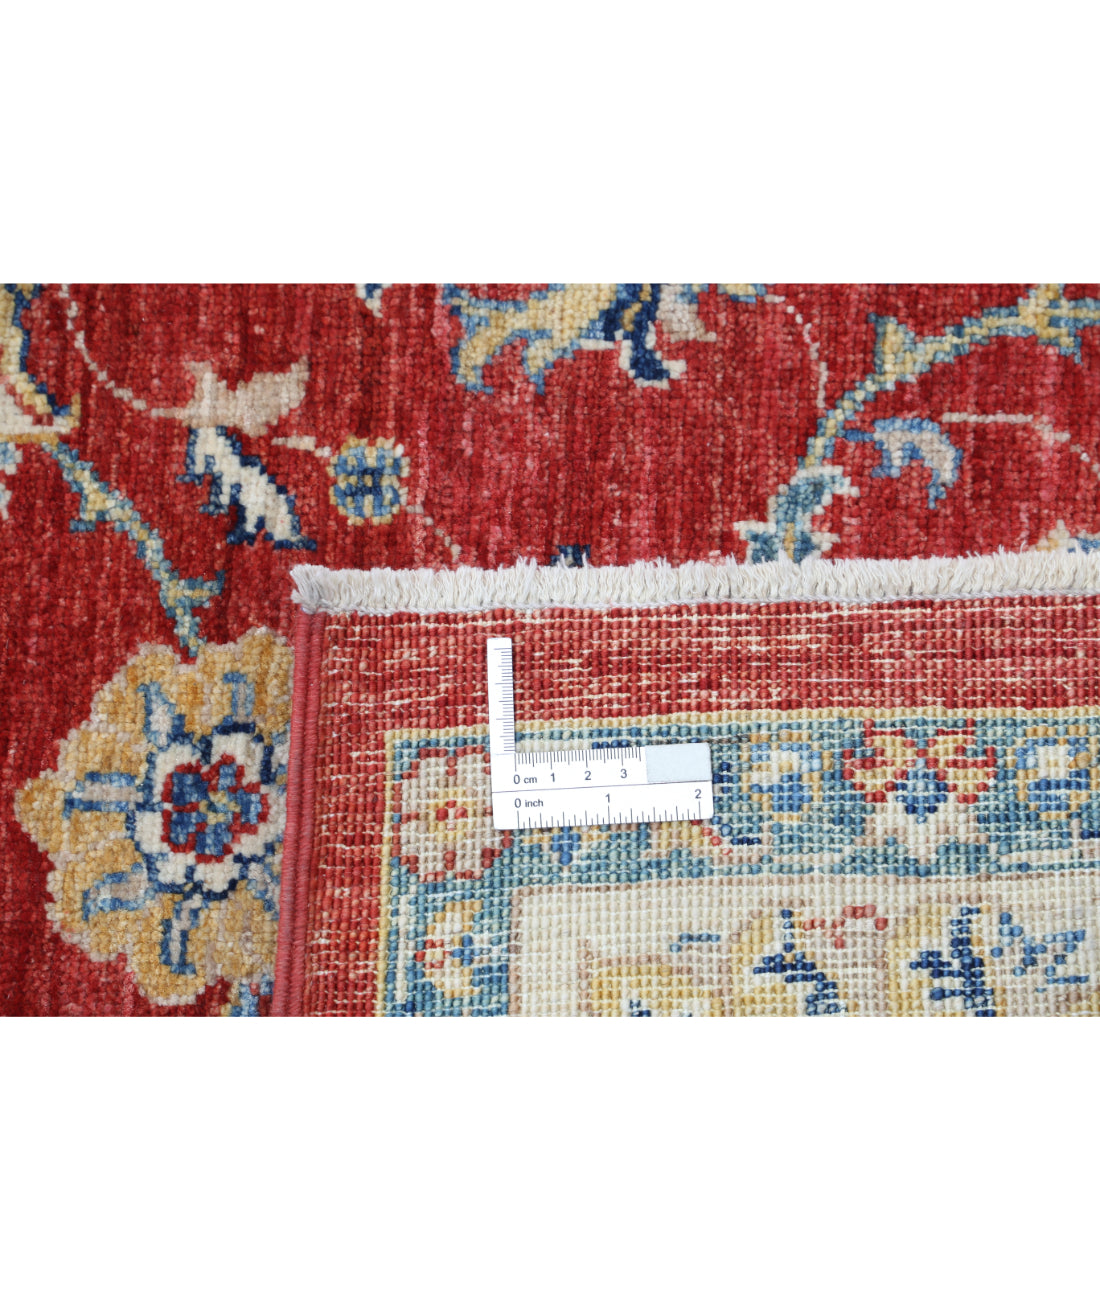 Hand Knotted Ziegler Farhan Wool Rug - 5'7'' x 7'11'' 5'7'' x 7'11'' (168 X 238) / Red / Ivory